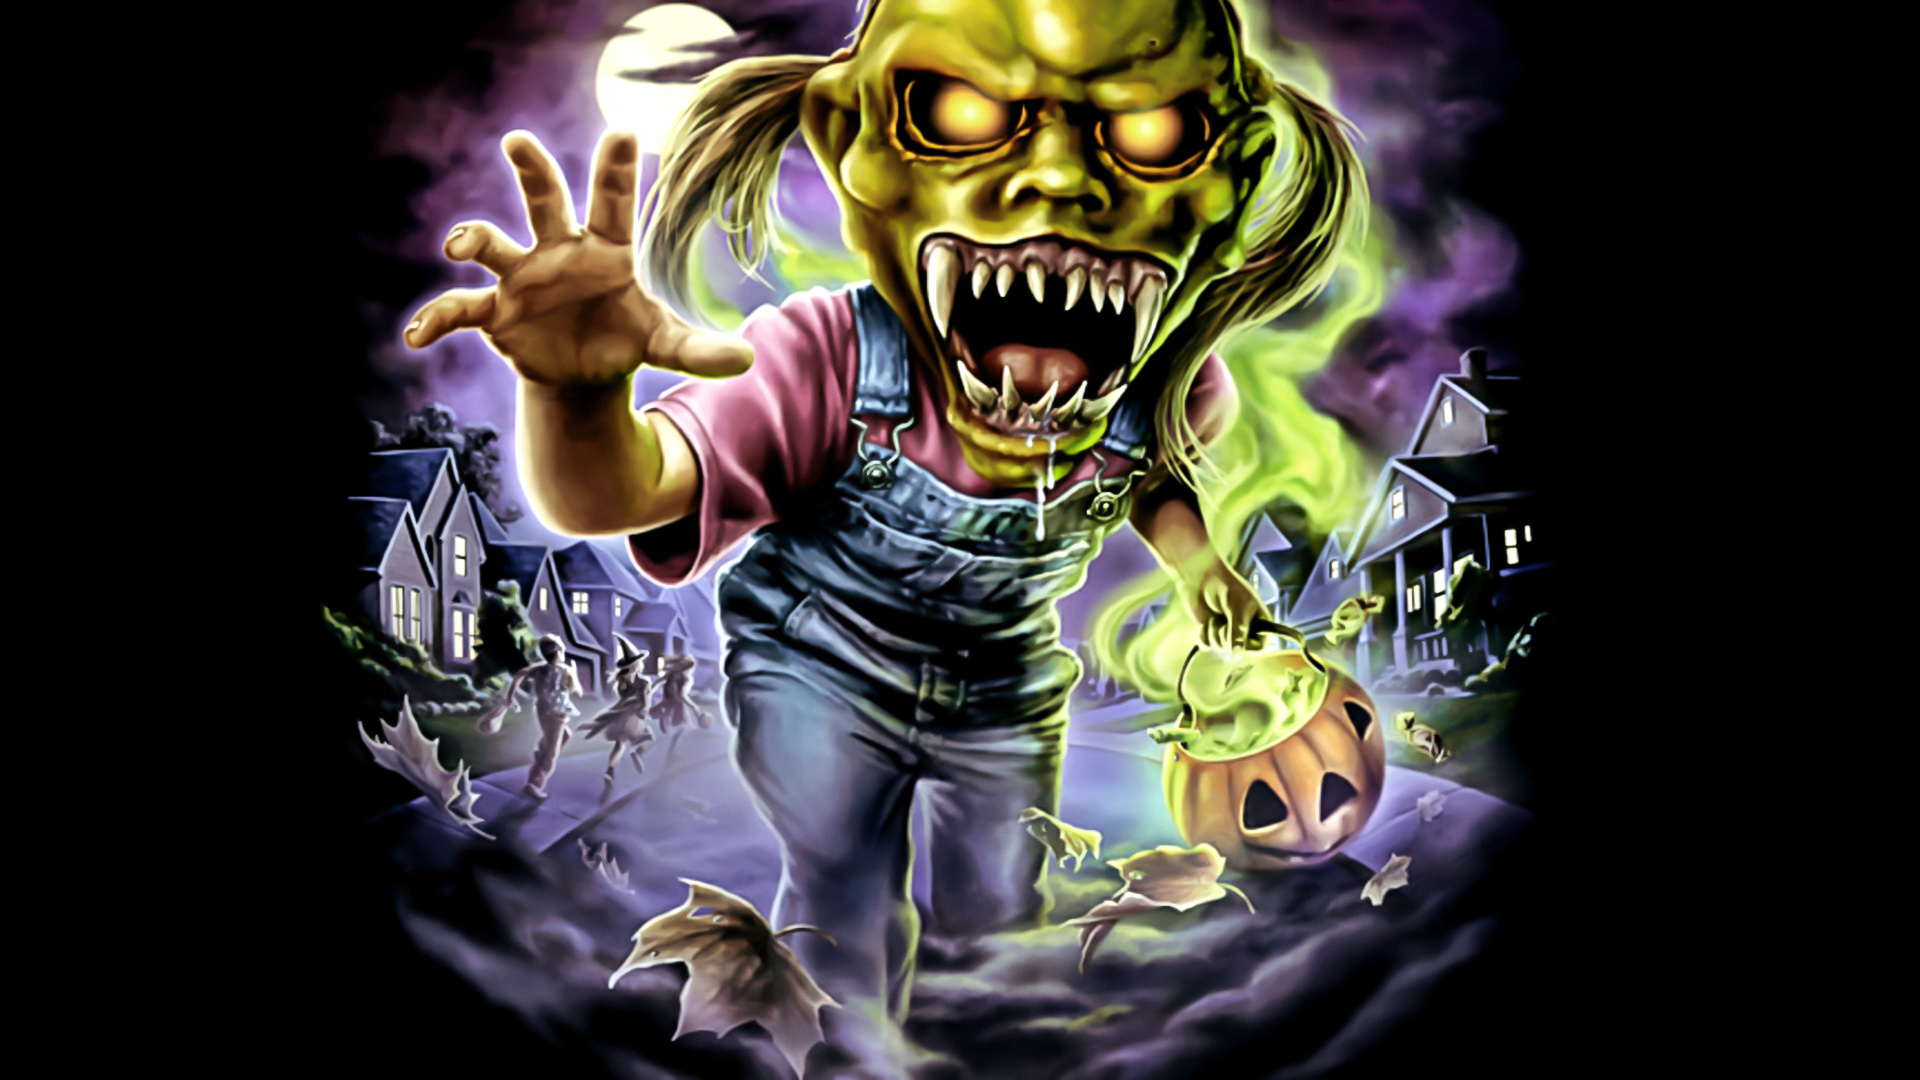 Goosebumps (TV Series): The Haunted Mask, The 11th book in the series of children's horror fiction novels created and written by R. L. Stine. 1920x1080 Full HD Background.